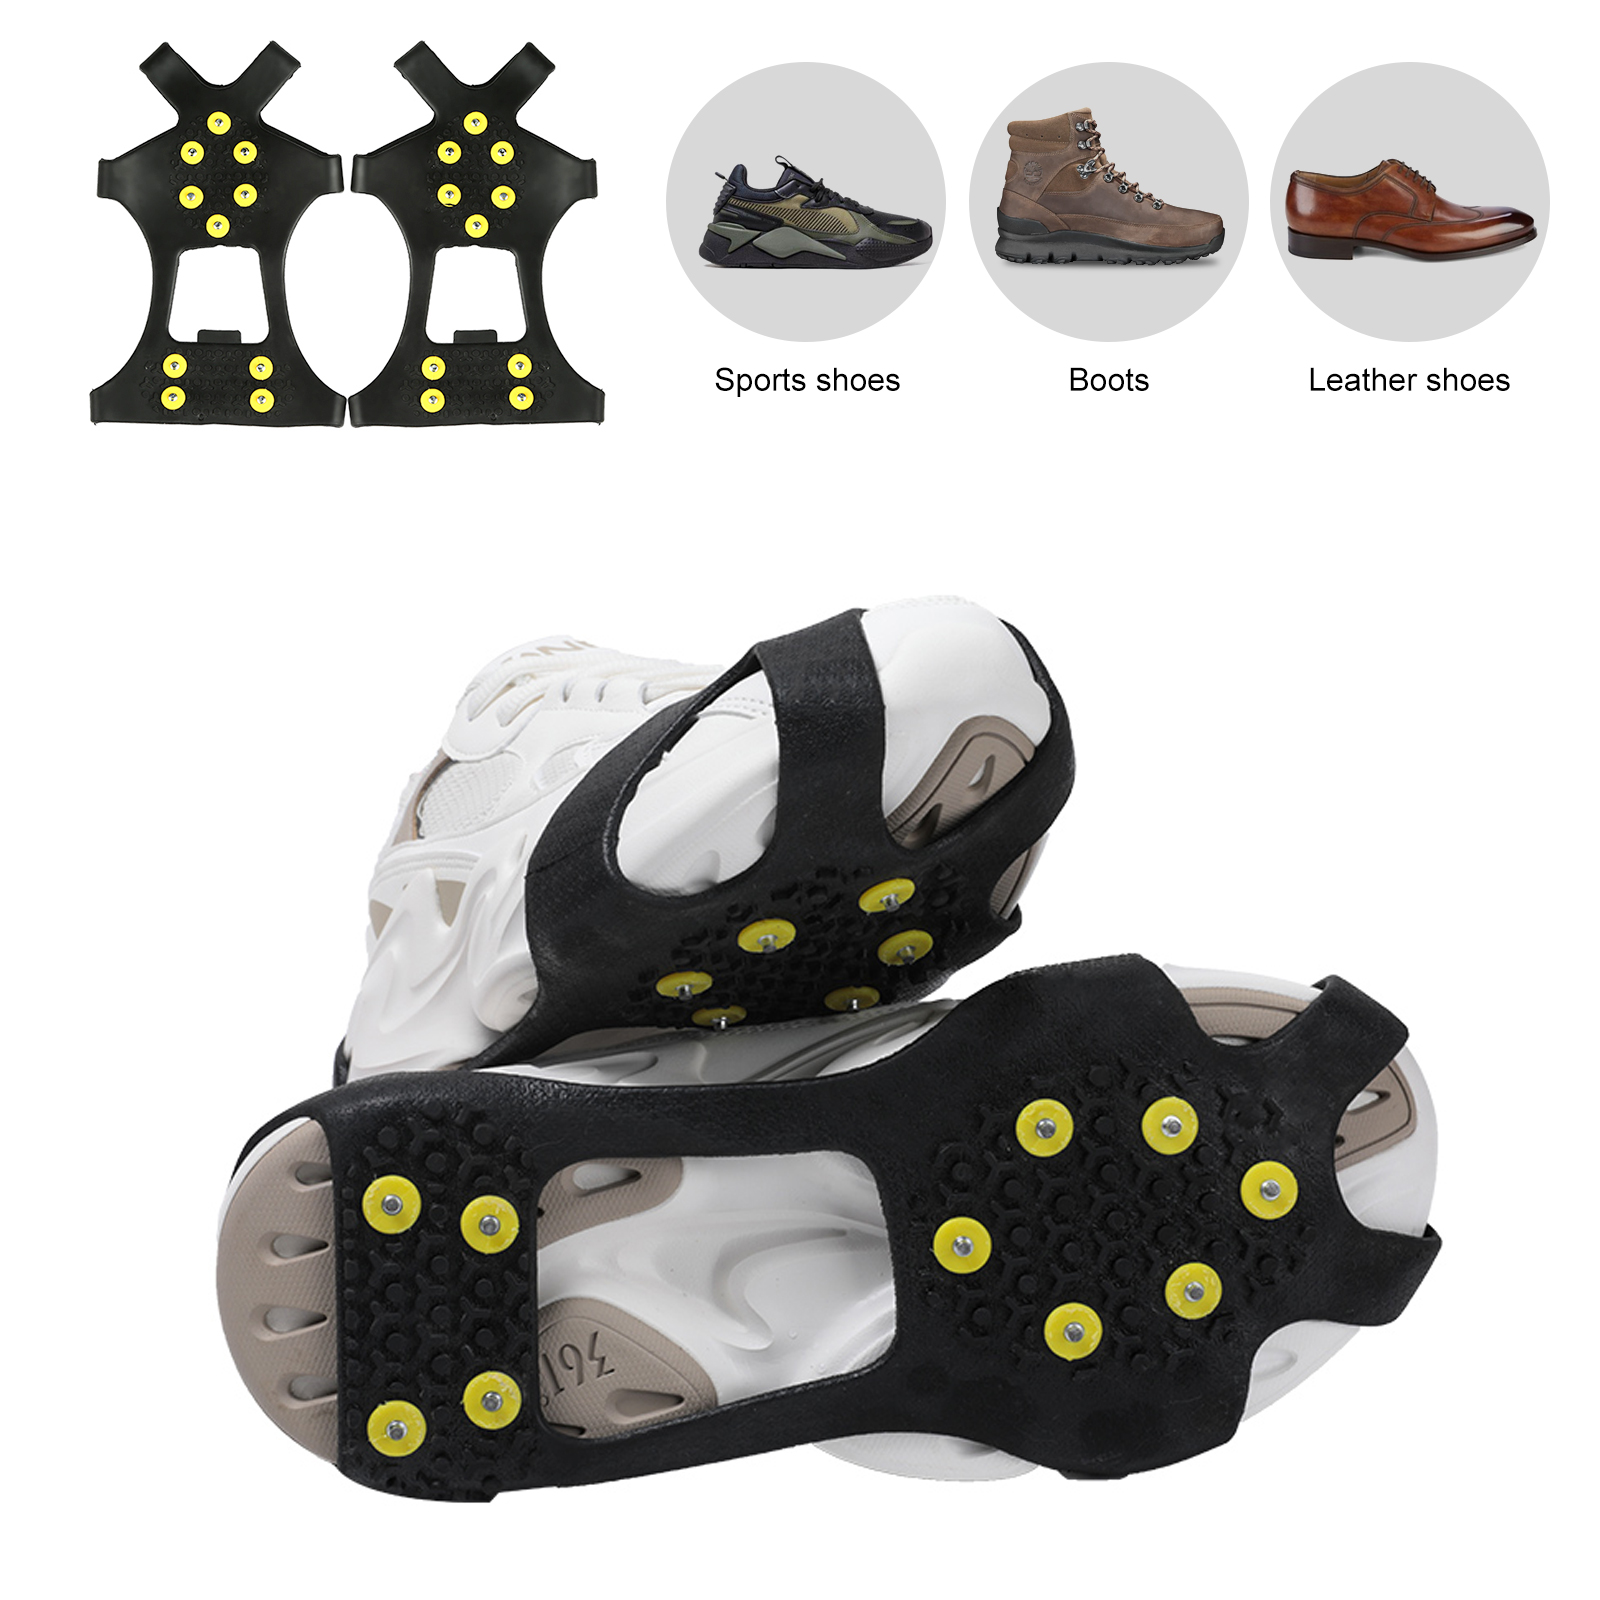 AGPtek Anti Slip Grip Shoe Covers Overshoes Snow Shoes Crampons Cleats for Ice Snow XL - image 1 of 7